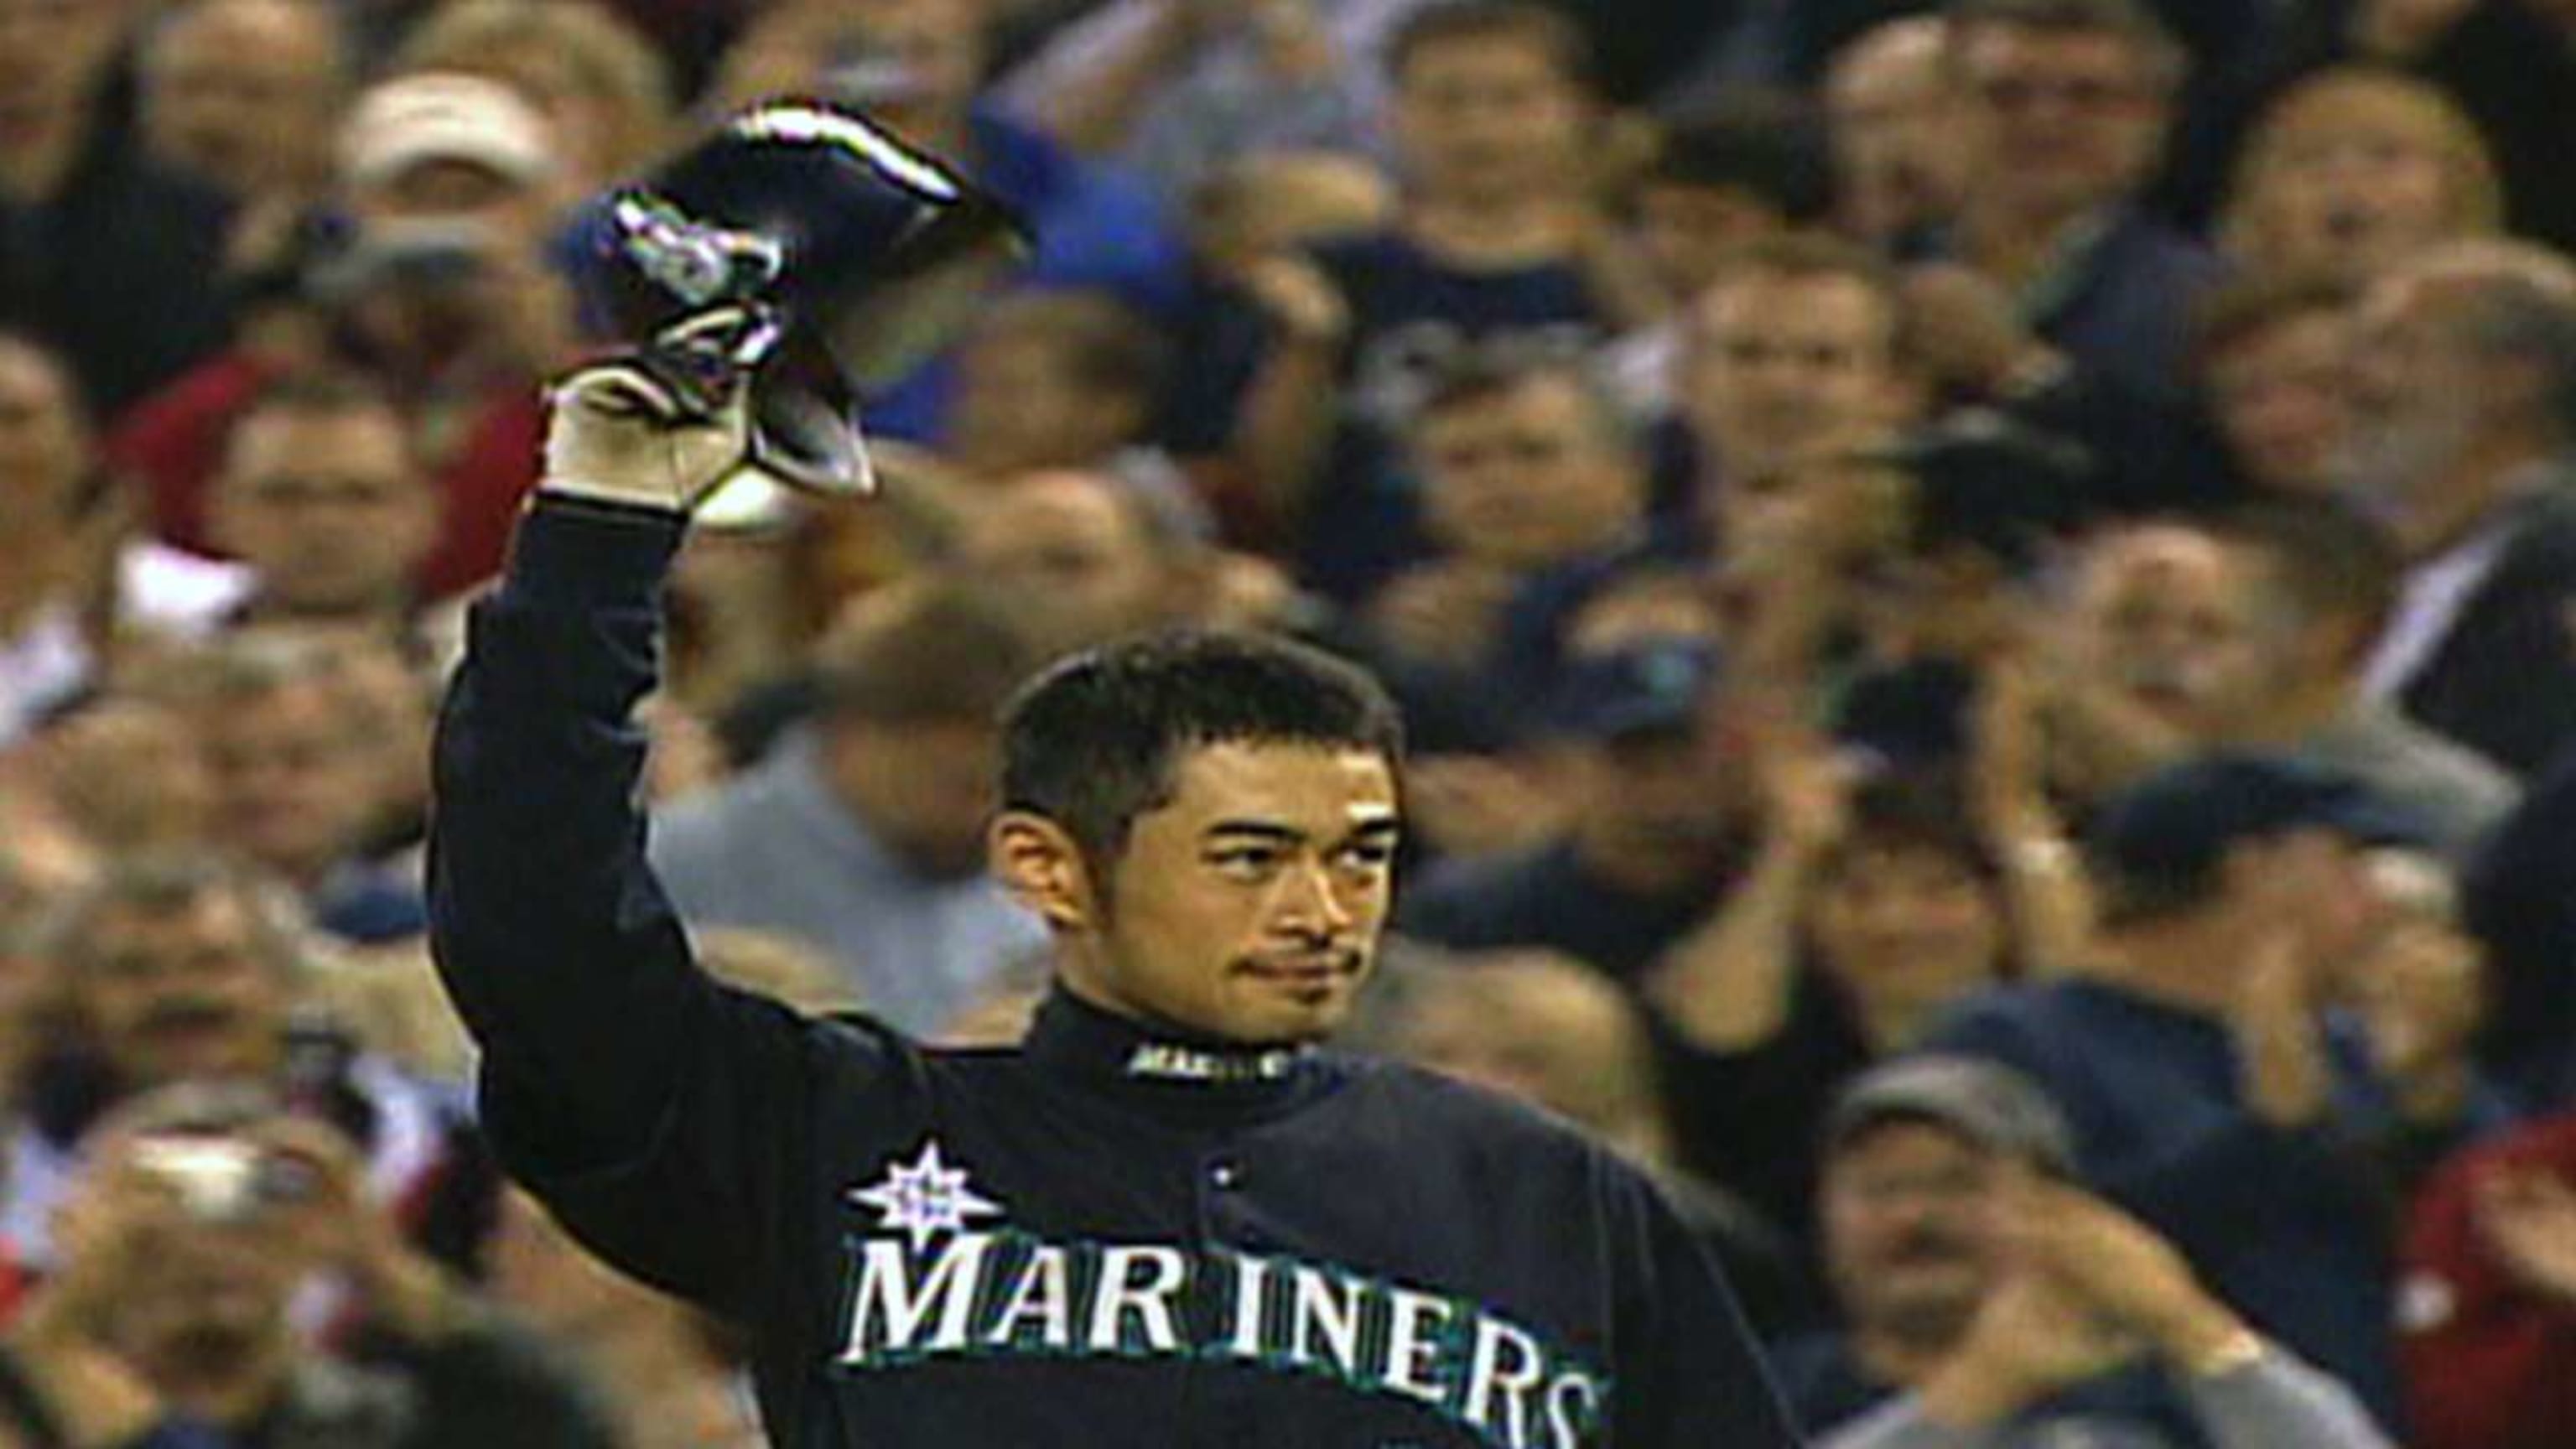 Ichiro's career spawned unforgettable memories for many, including me